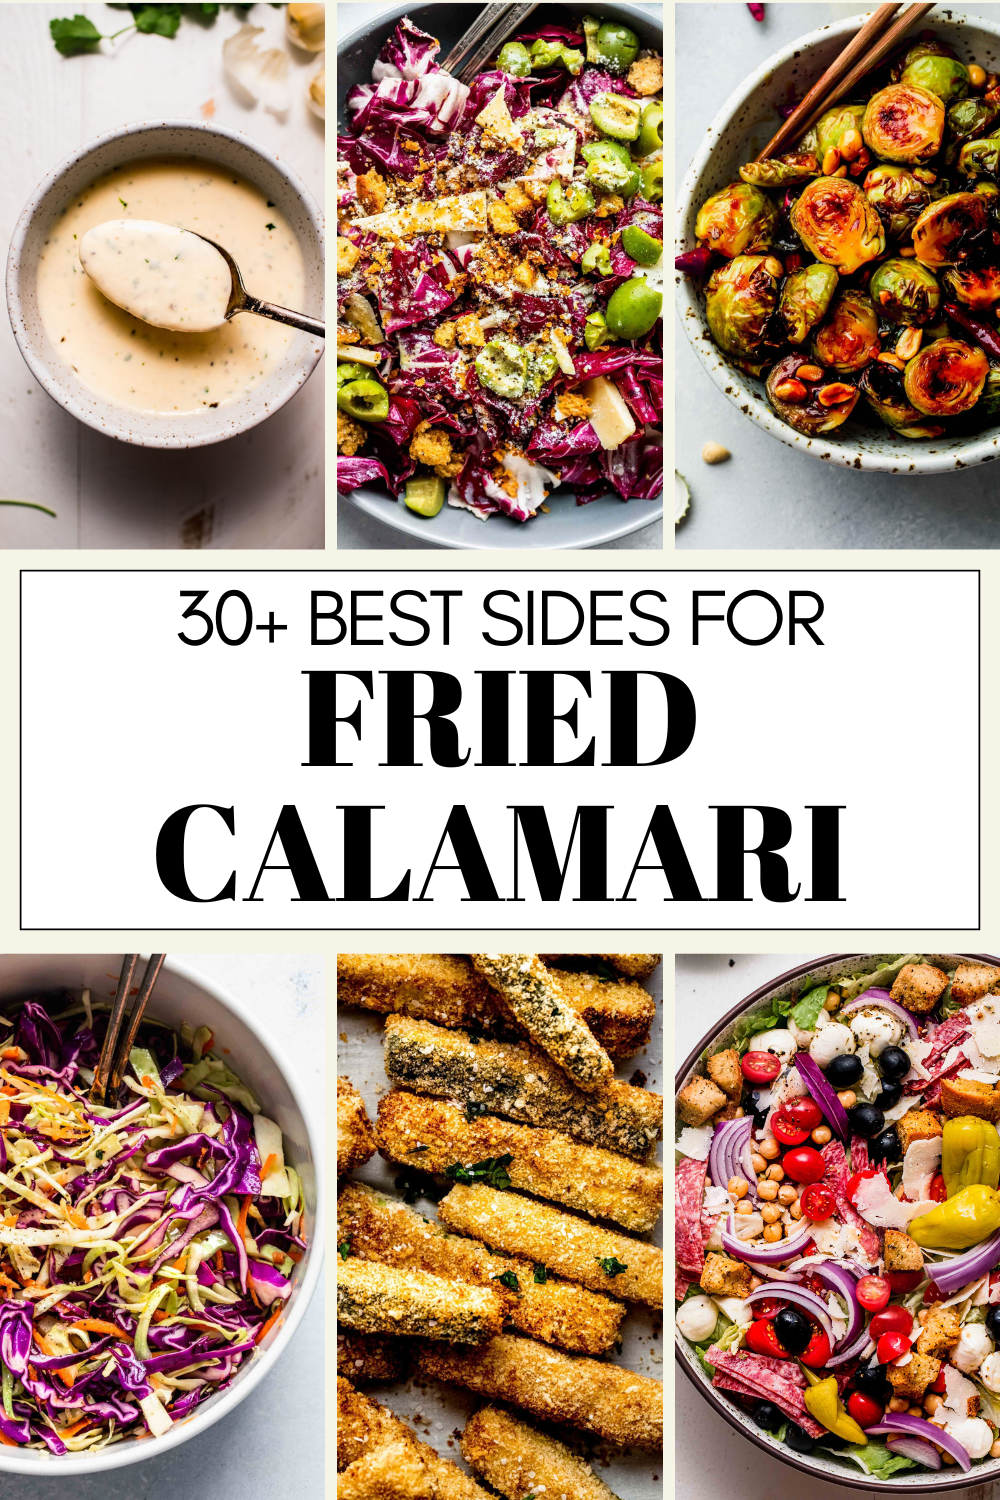 COLLAGE OF SIDES FOR FRIED CALAMARI WITH TEXT OVERLAY.